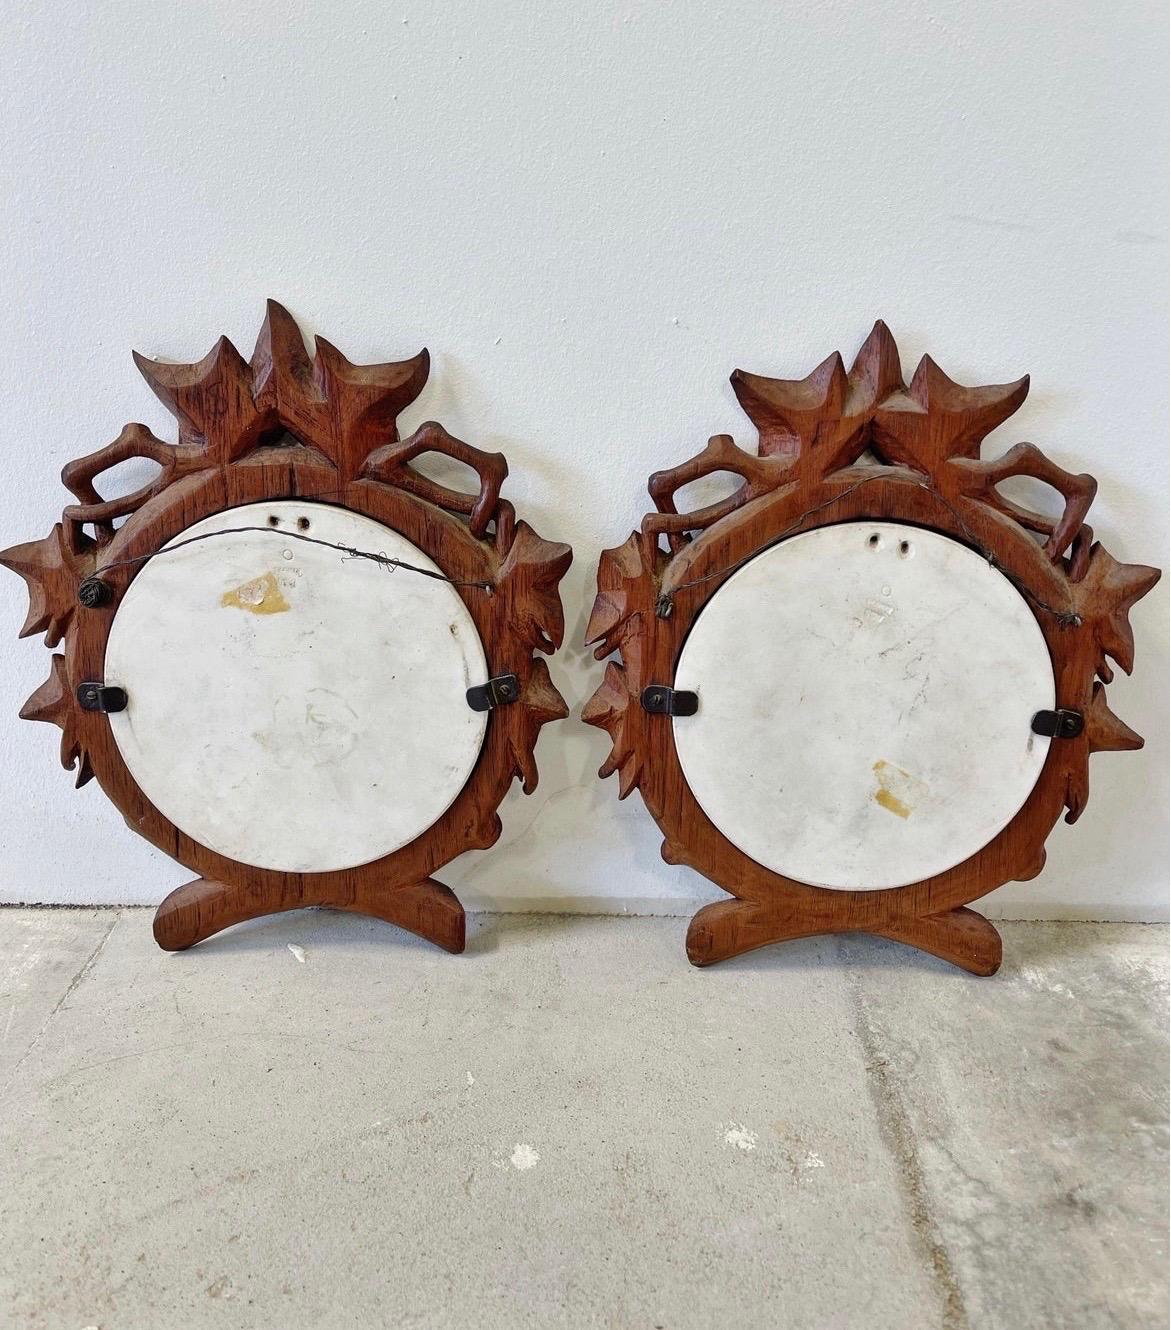 A pair of antique bisque parian ware plaques mounted in finely carved black forest frames. Ready to hang!